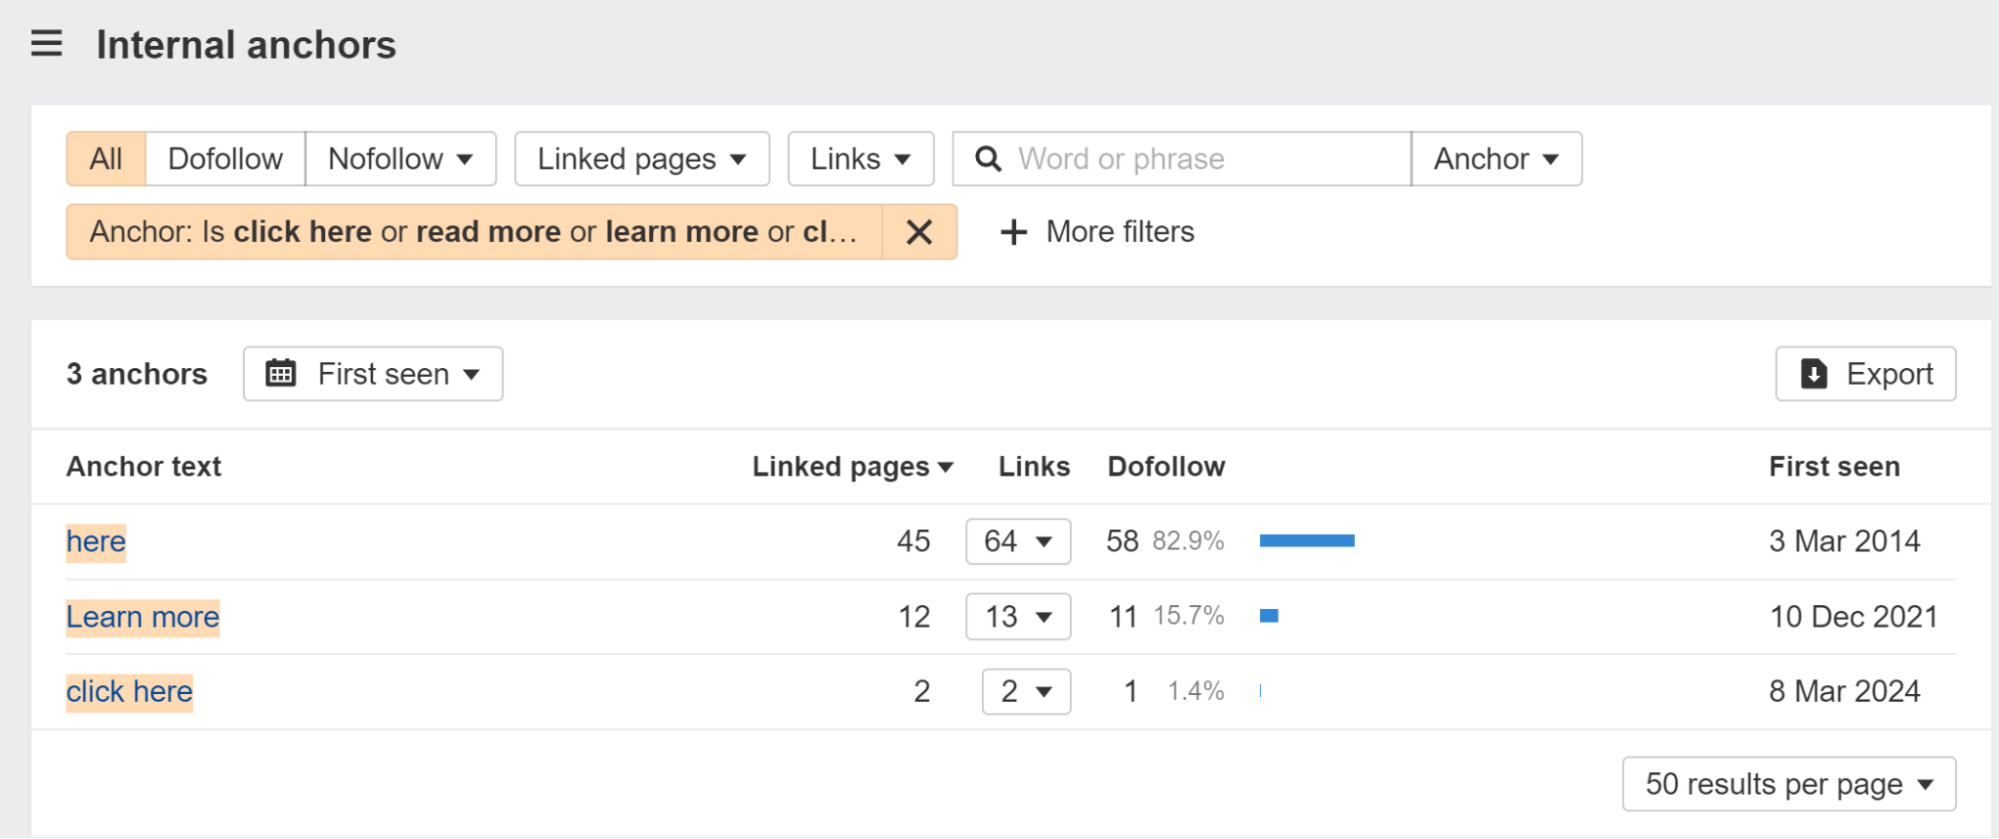 The internal anchors report can help you find generic anchor text mentions